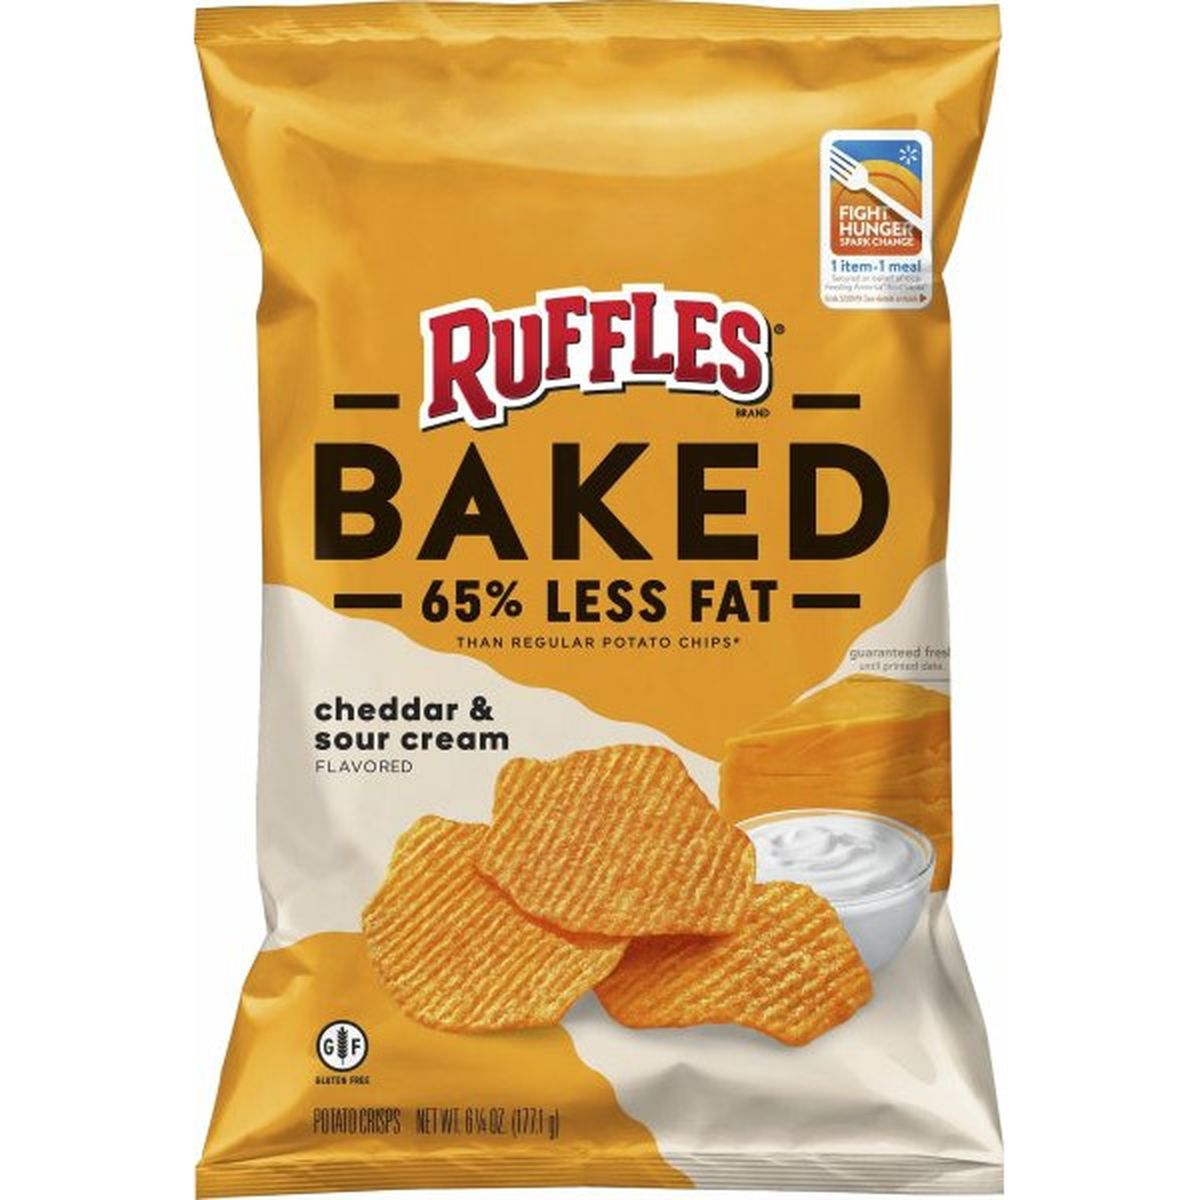 Calories in Ruffles Baked Potato Chips, Cheddar & Sour Cream Flavored